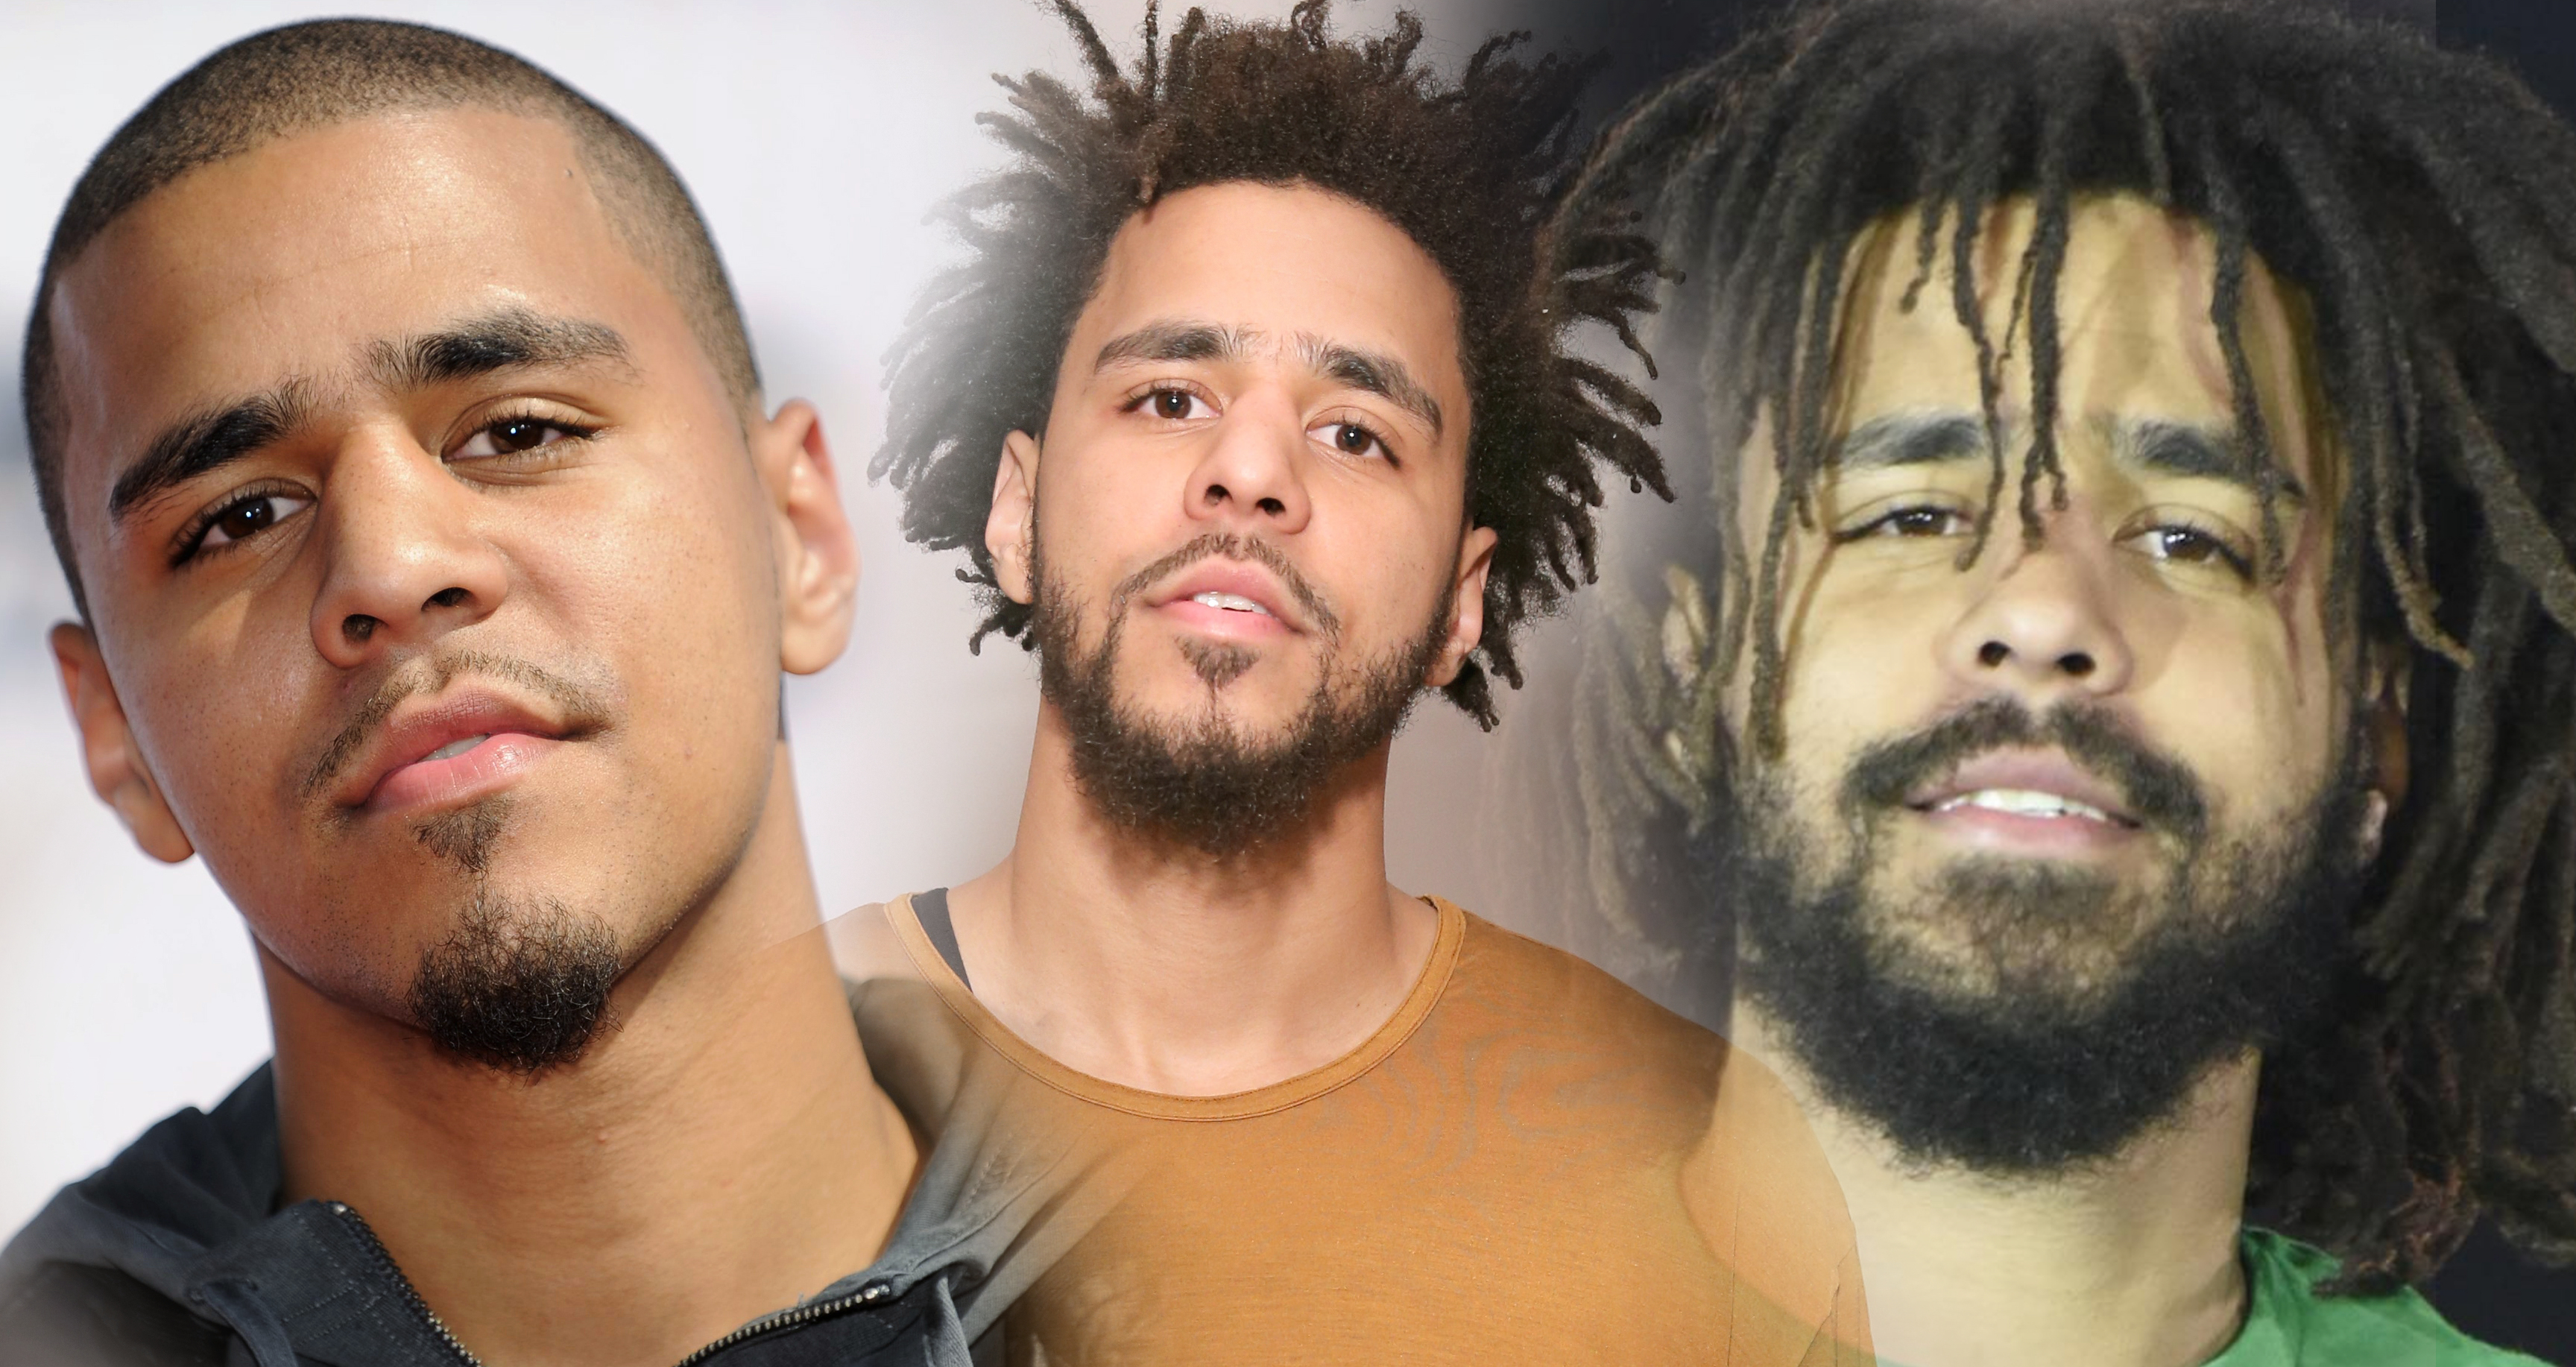 J.Cole with and without a beard